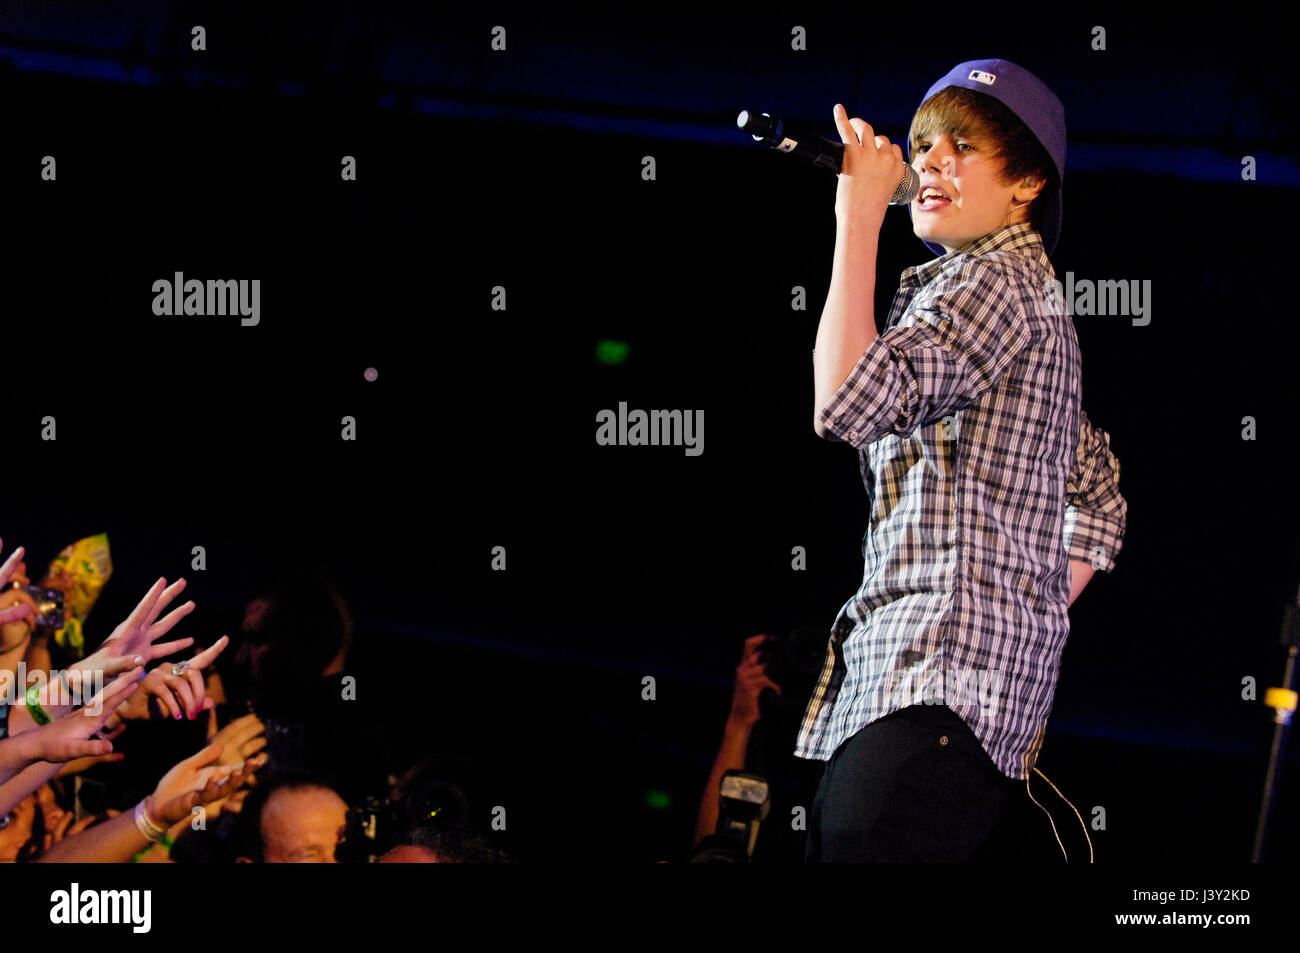 Justin Bieber performs at THe Hollywood Palladium on February 14, 2010 in Hollywood. Stock Photo